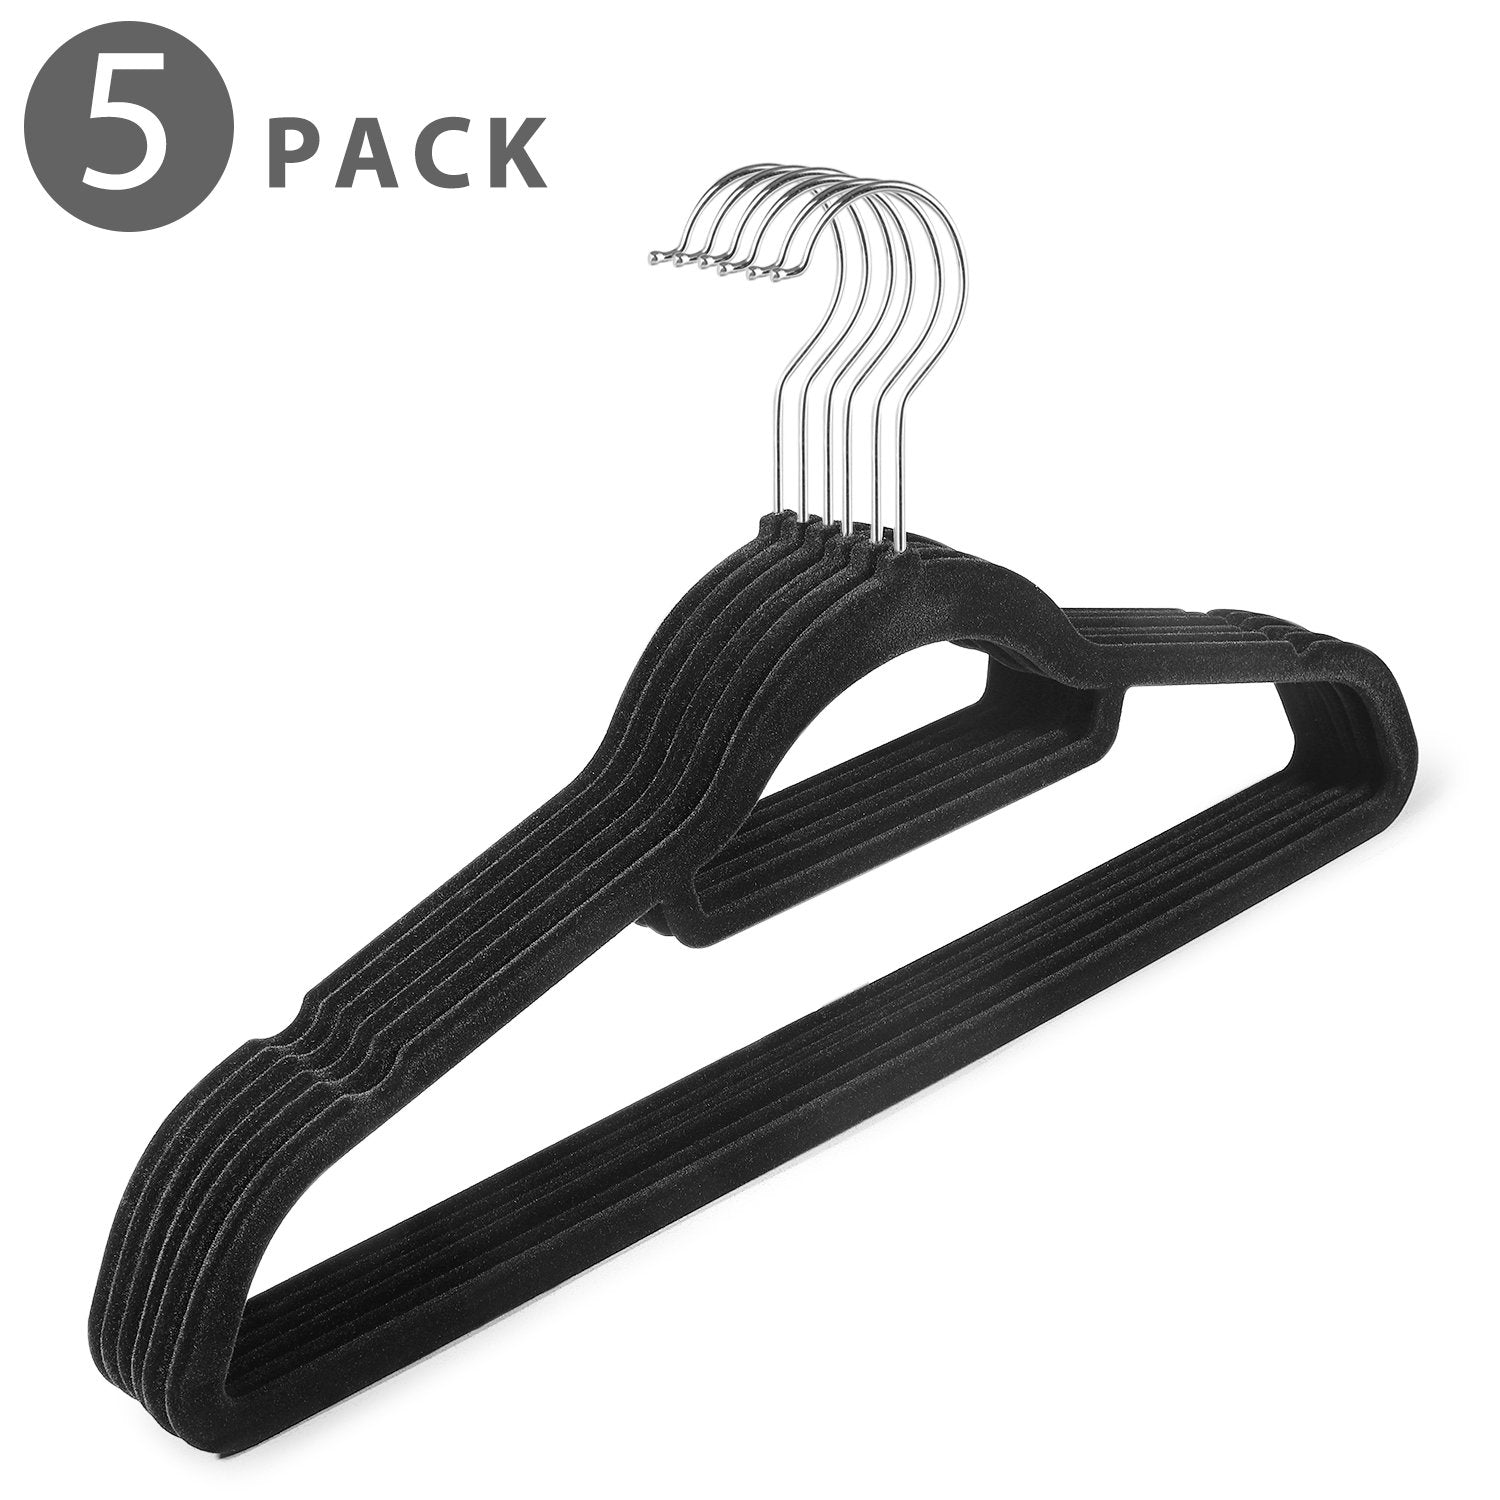 Flexzion Velvet Hanger - Non Slip Dress Hanger with Accessory Bar Space Saving, Strong and Durable with 360 Degree Swivel Hook, Contoured Shoulder for Shirts Clothes Coat Suit Pants (5 Pack, Black)